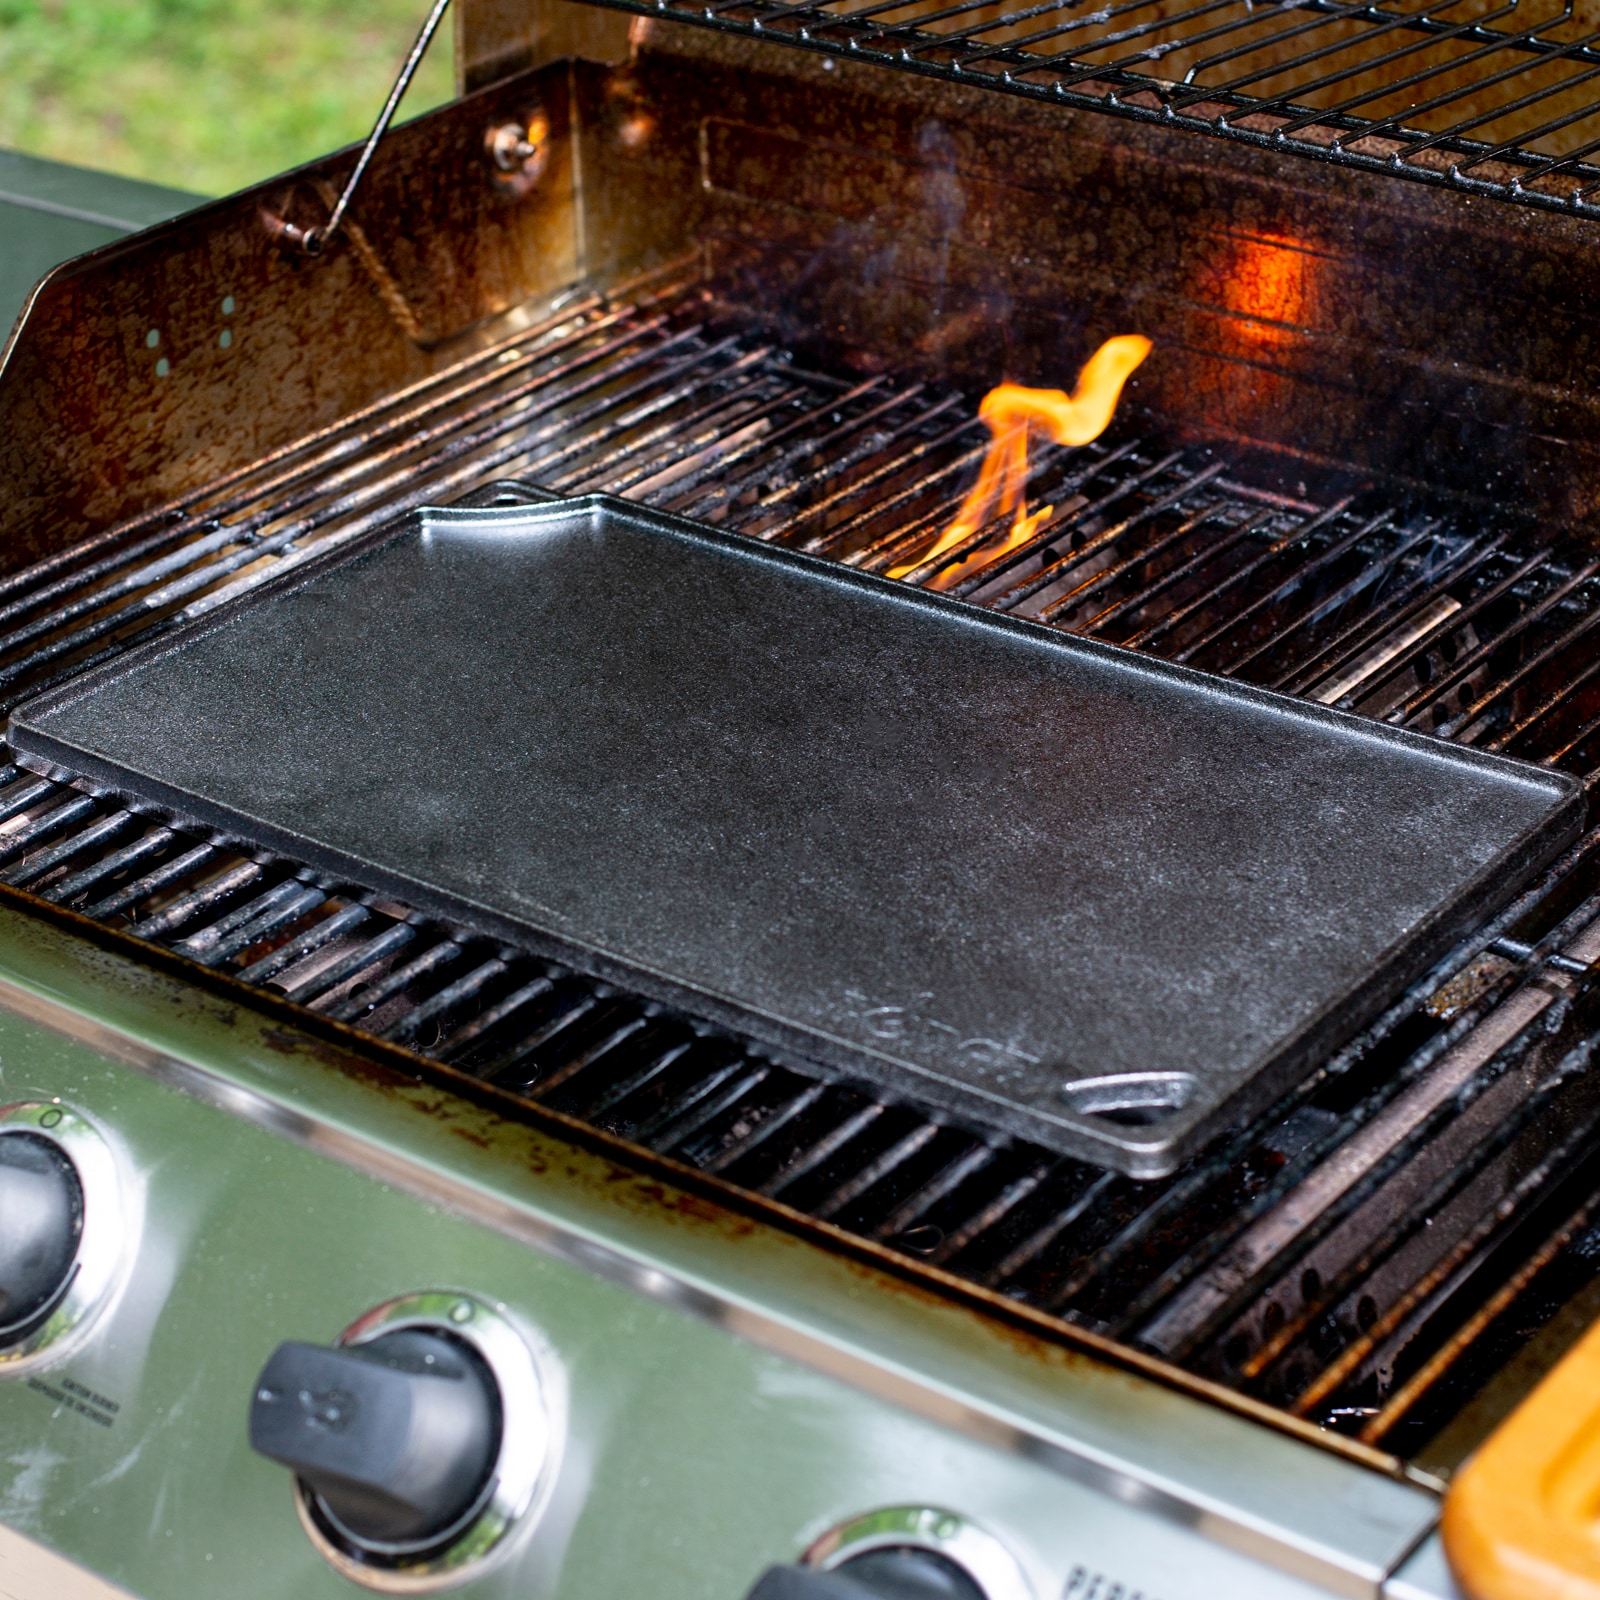 Lodge Logic Reversible Cast Iron Grill/Griddle, 1 - Harris Teeter